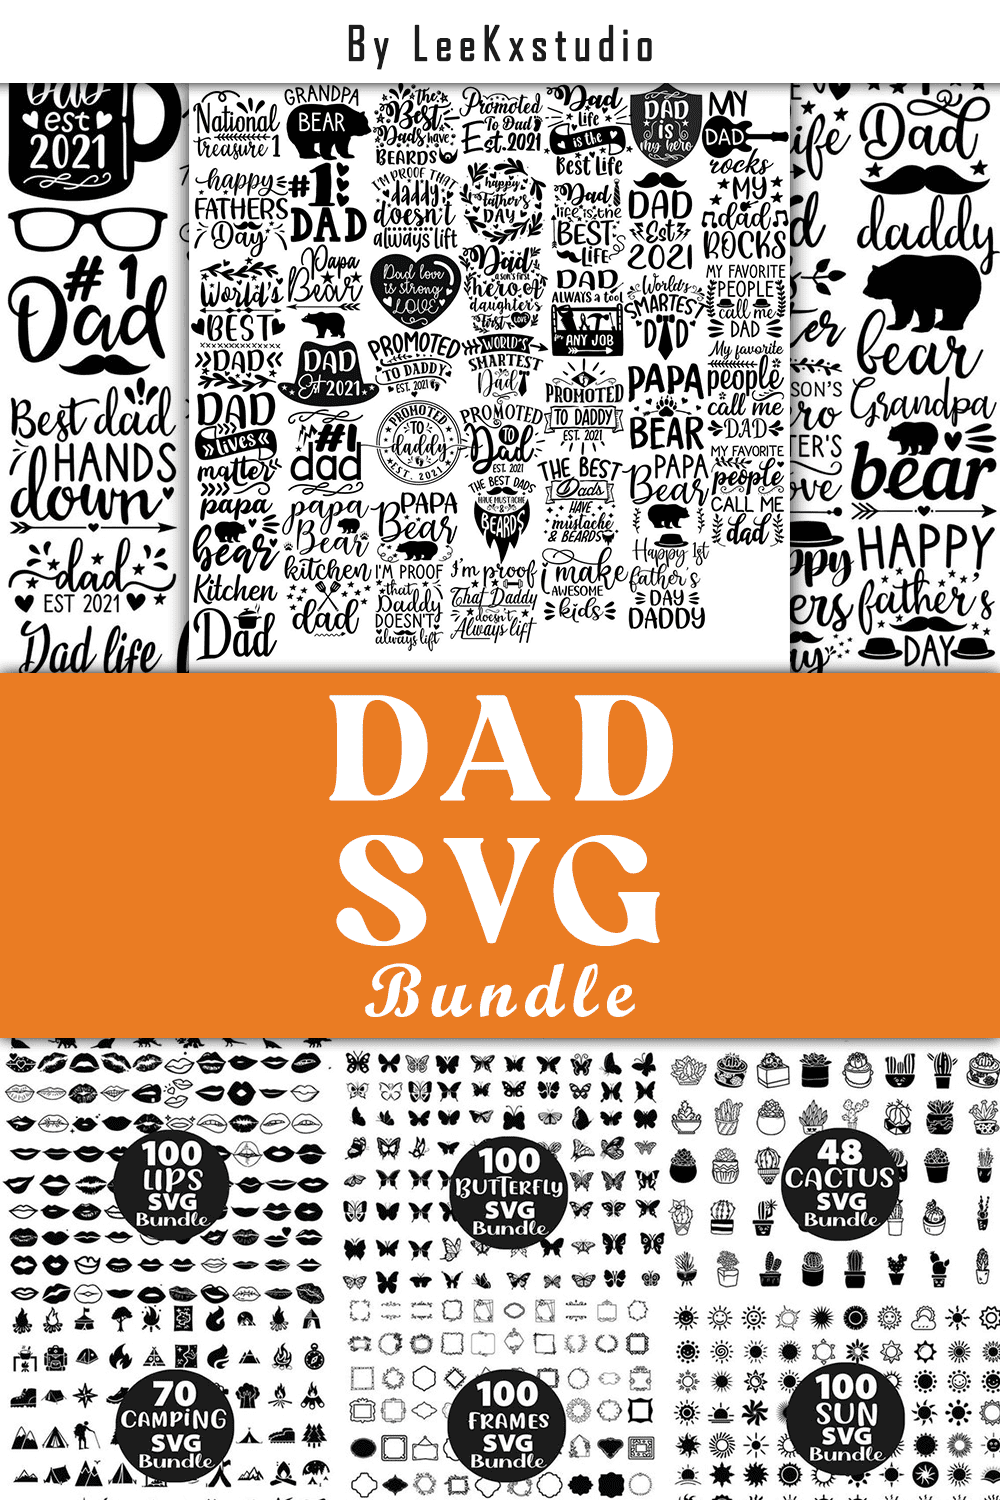 Cool simple dad SVG collection.